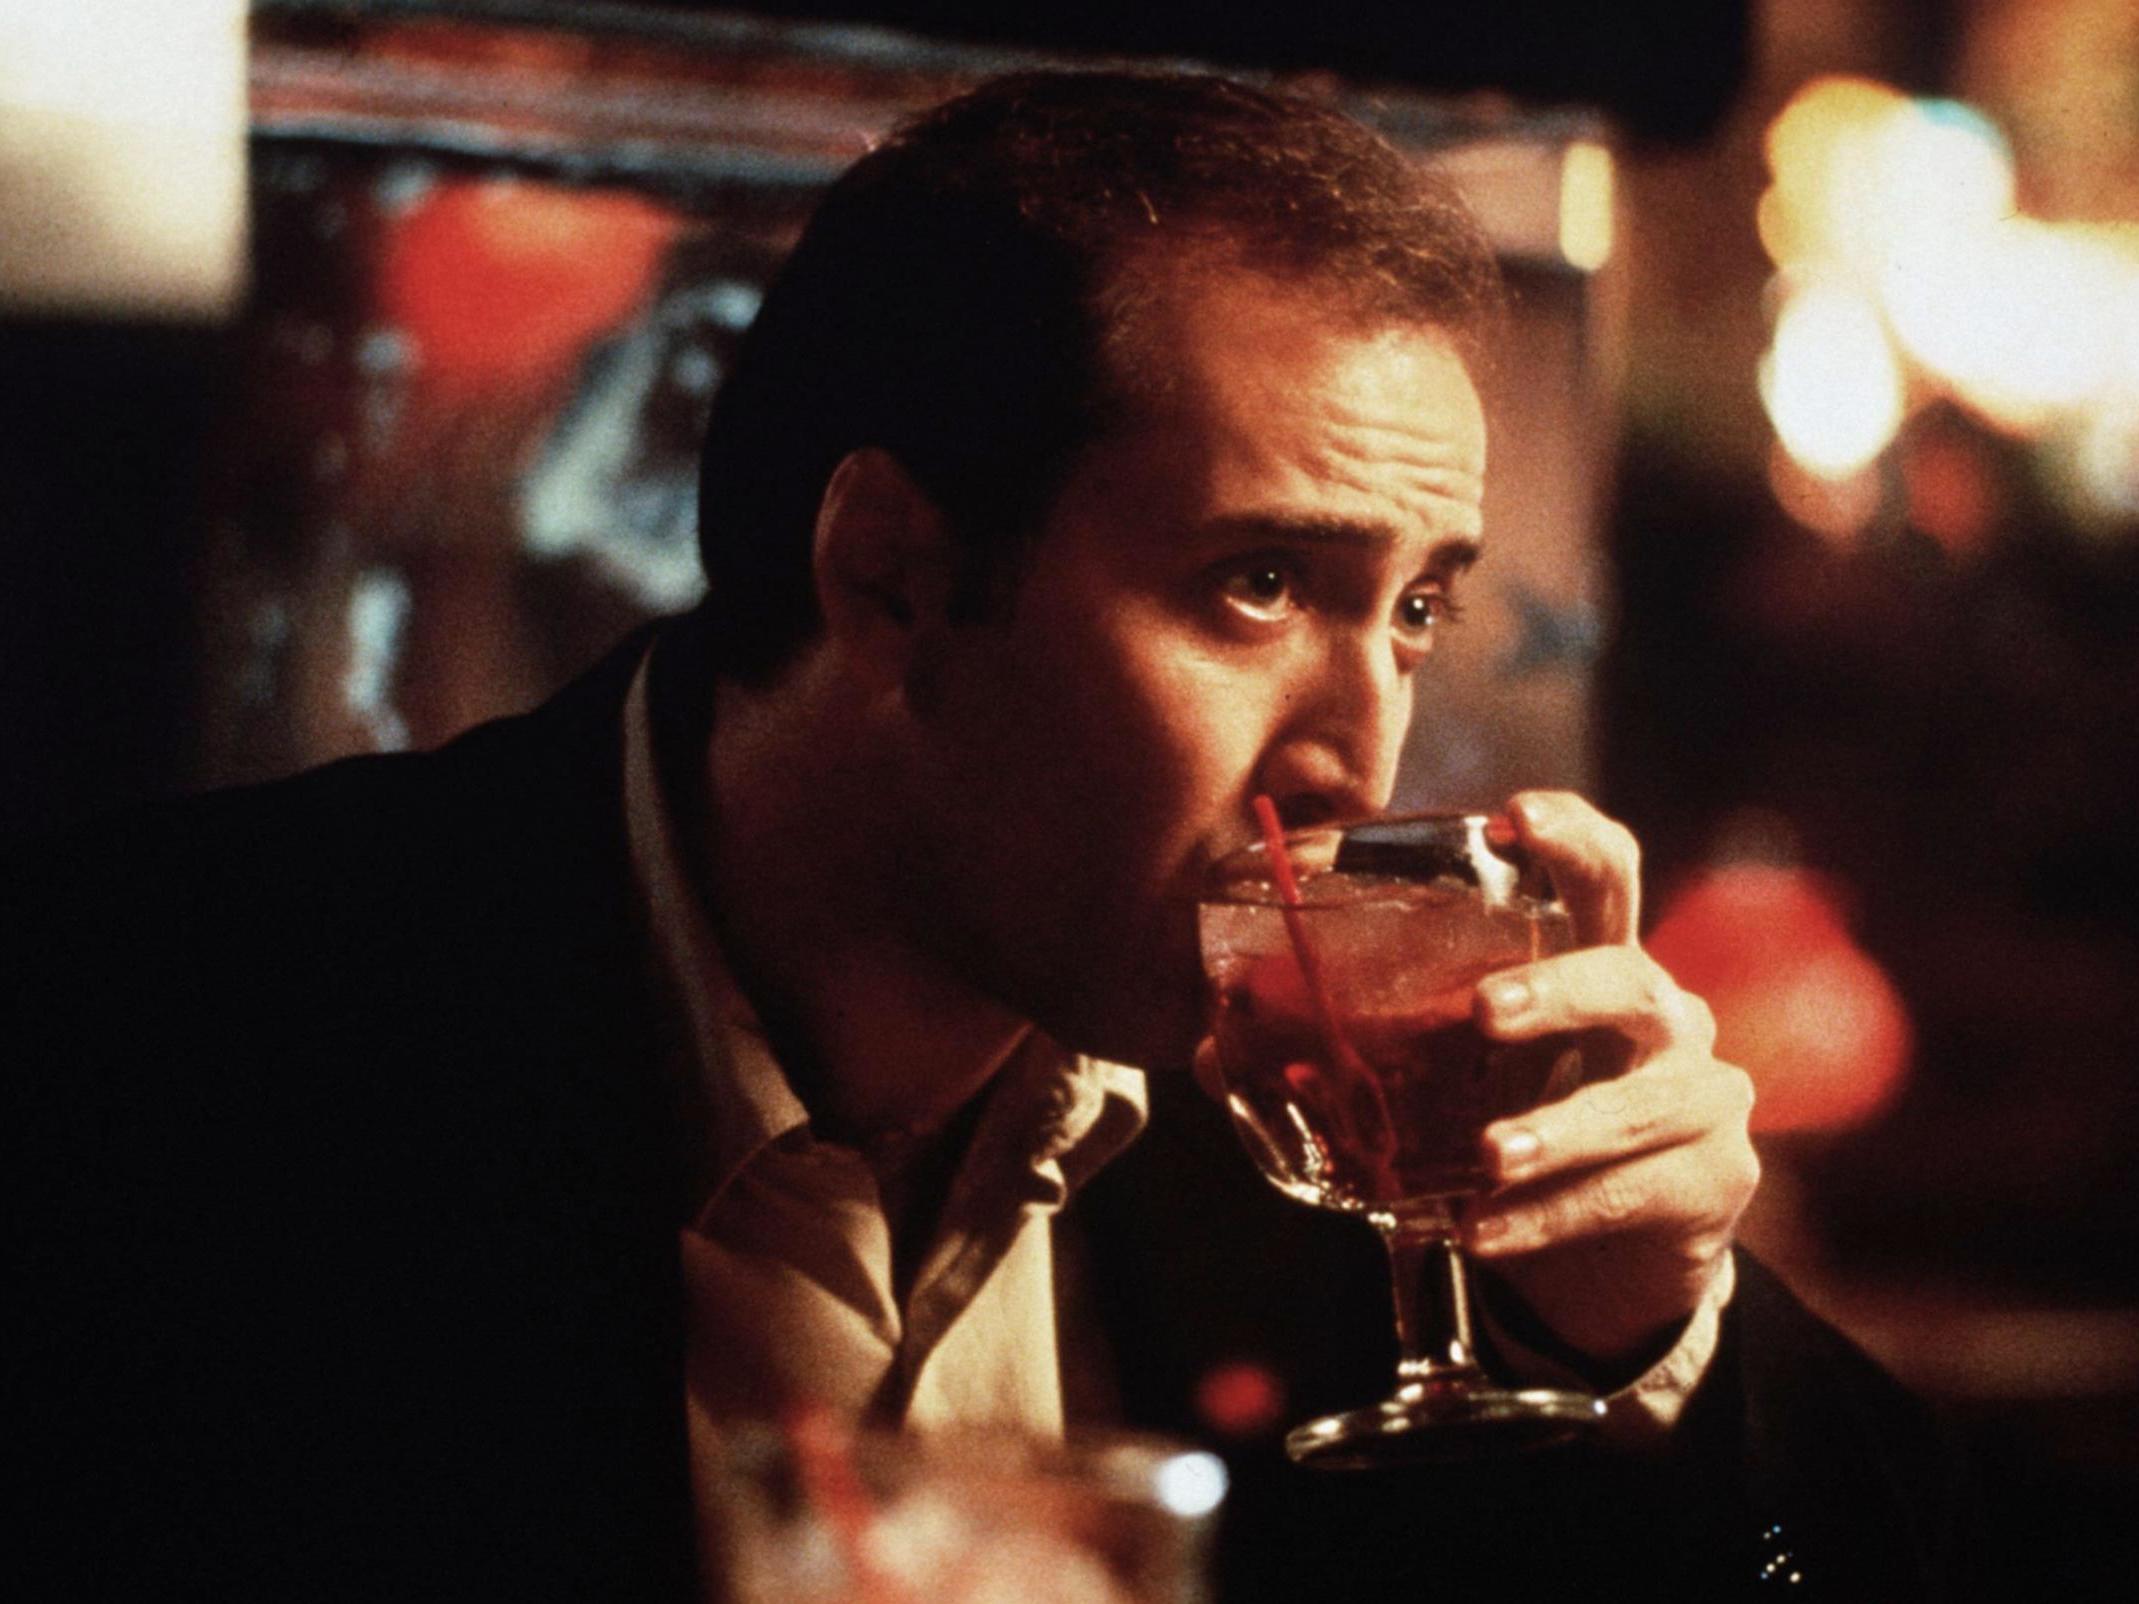 Nicolas Cage won an Academy Award for his role in alcoholism drama ‘Leaving Las Vegas’